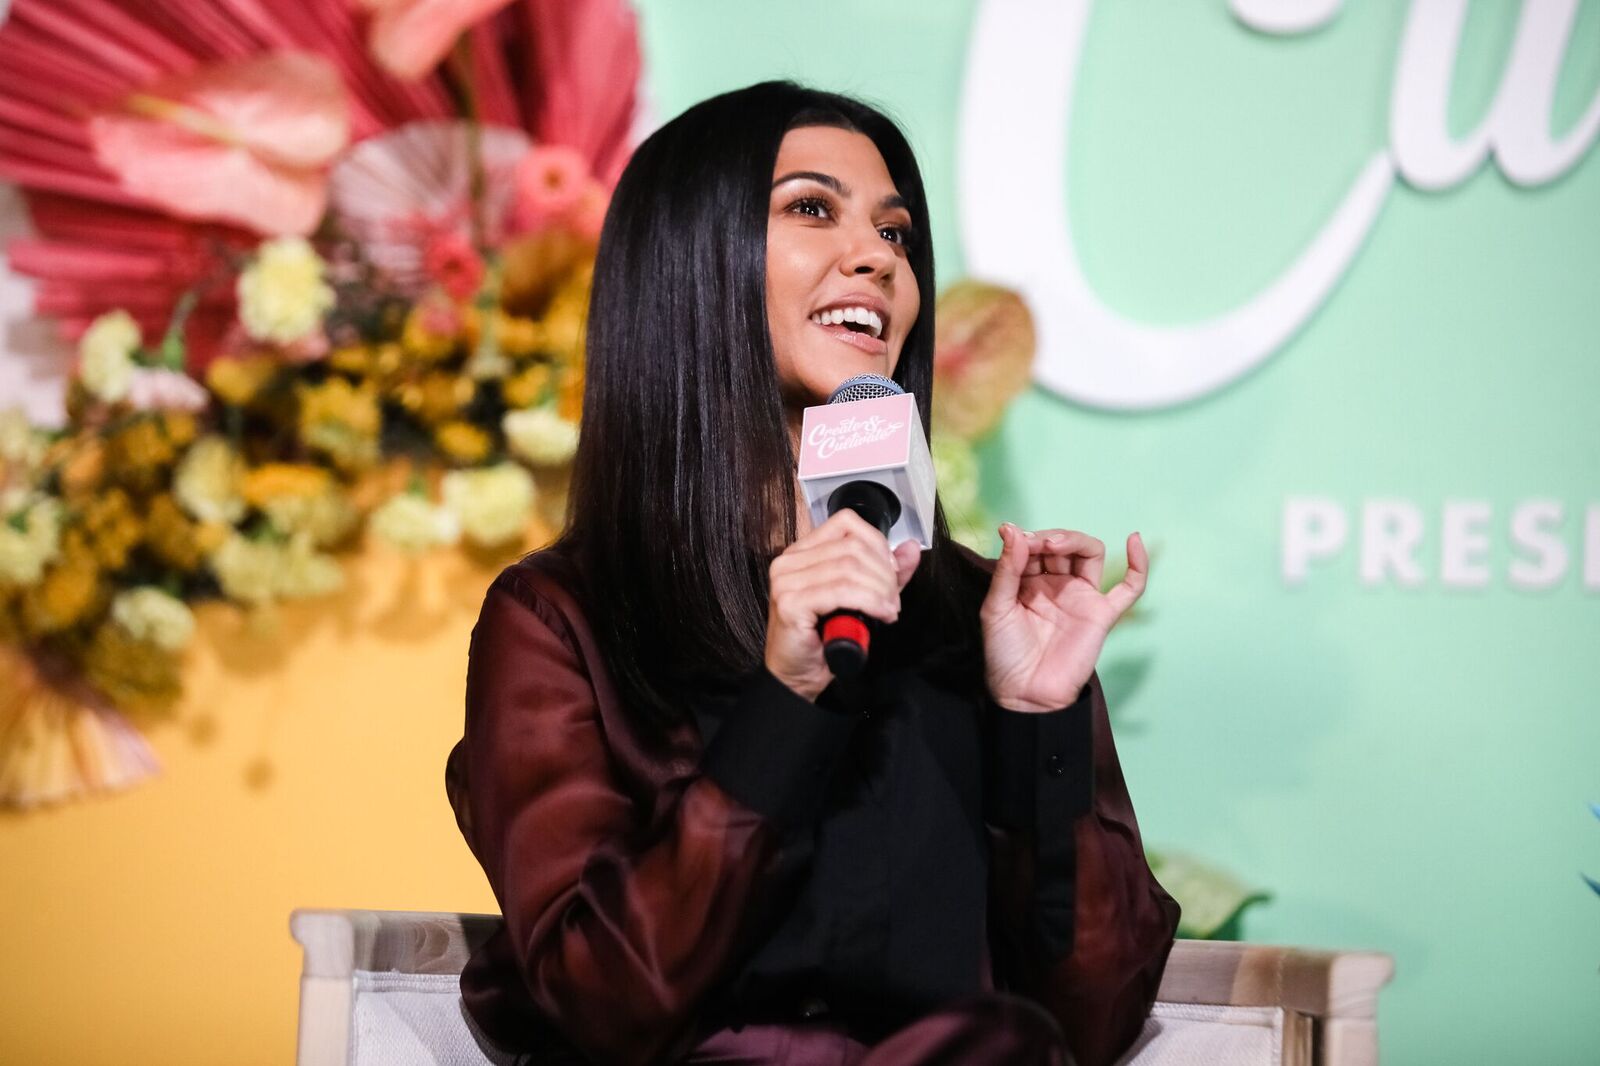 Kourtney Kardashian speaks onstage at the Create & Cultivate Conference held at SVN West on September 21, 2019. | Photo: Getty Images